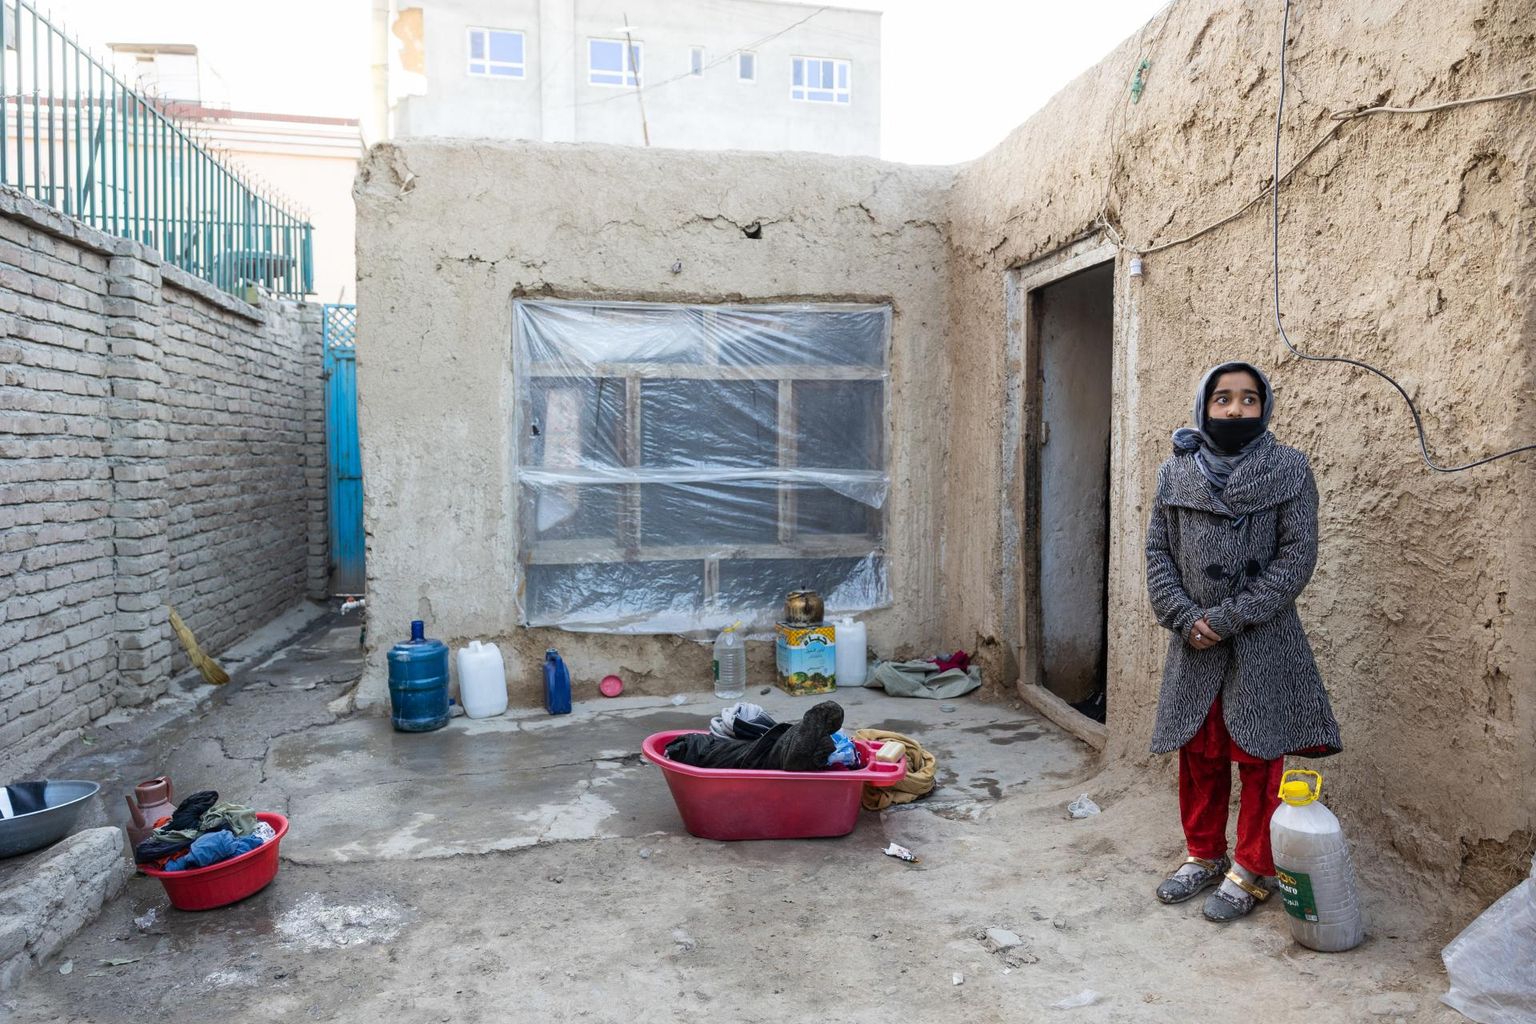 The family of Abdul, who used to work as a policeman for the previous government, lives in a bunker-like house the windows of which are covered in plast. Standing to the right is his 11-year-old daughter.